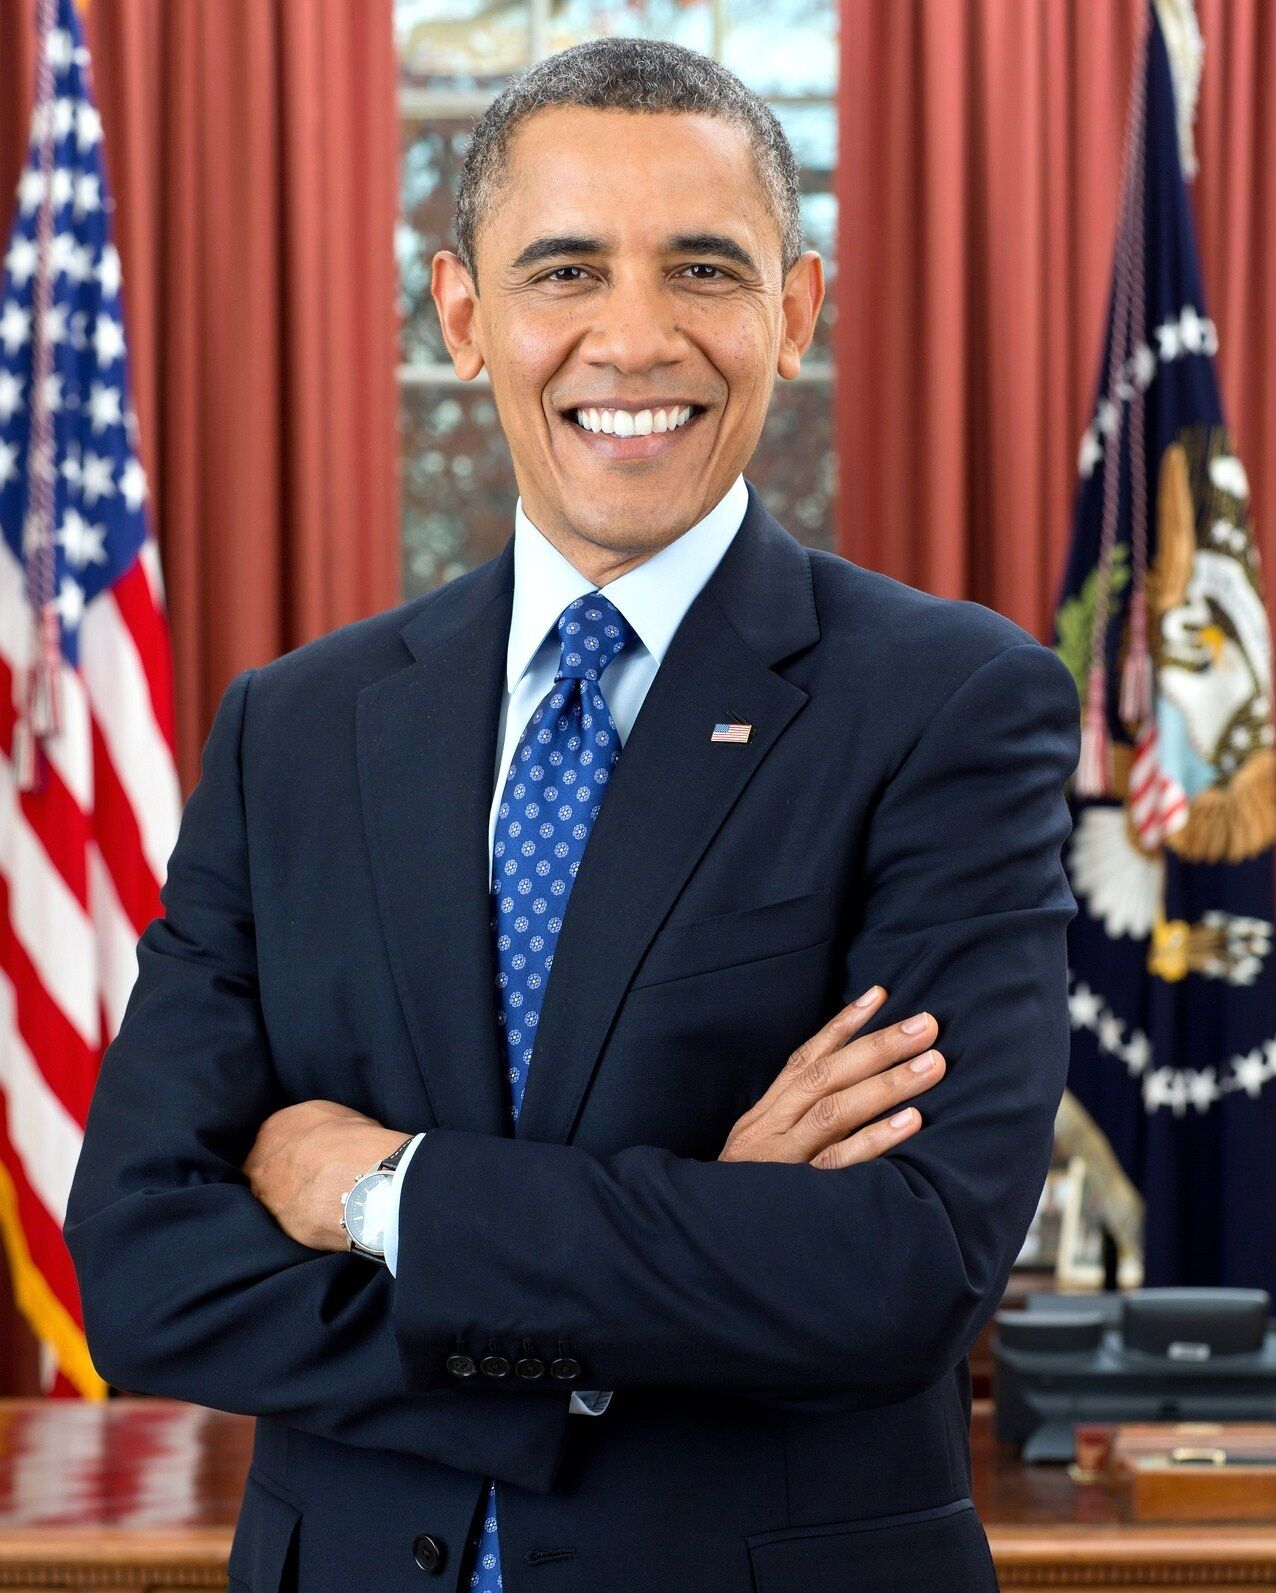 President Barack Obama 2nd Term Official Portrait 8 x 10 Photo Picture m1